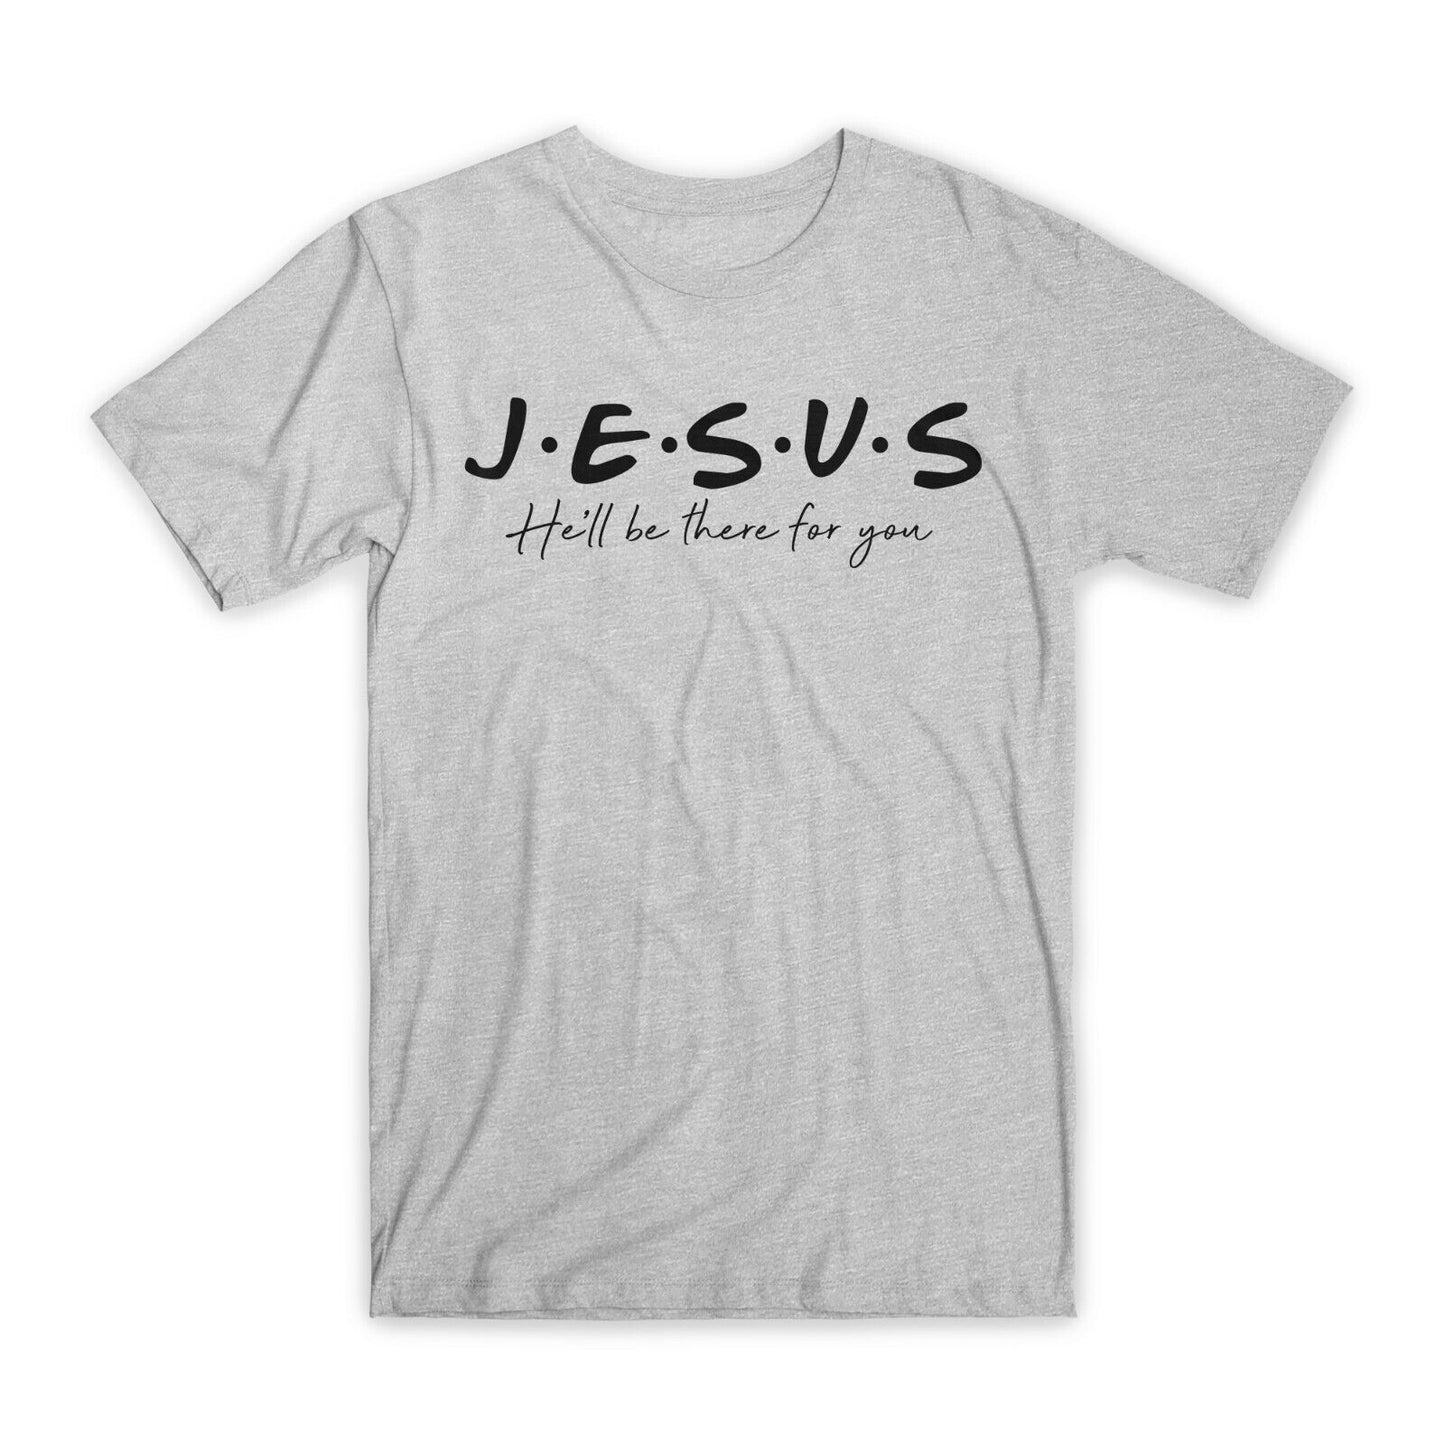 Jesus He'll Be There for You T-Shirt Premium Cotton Crew Neck Funny Tee Gift NEW